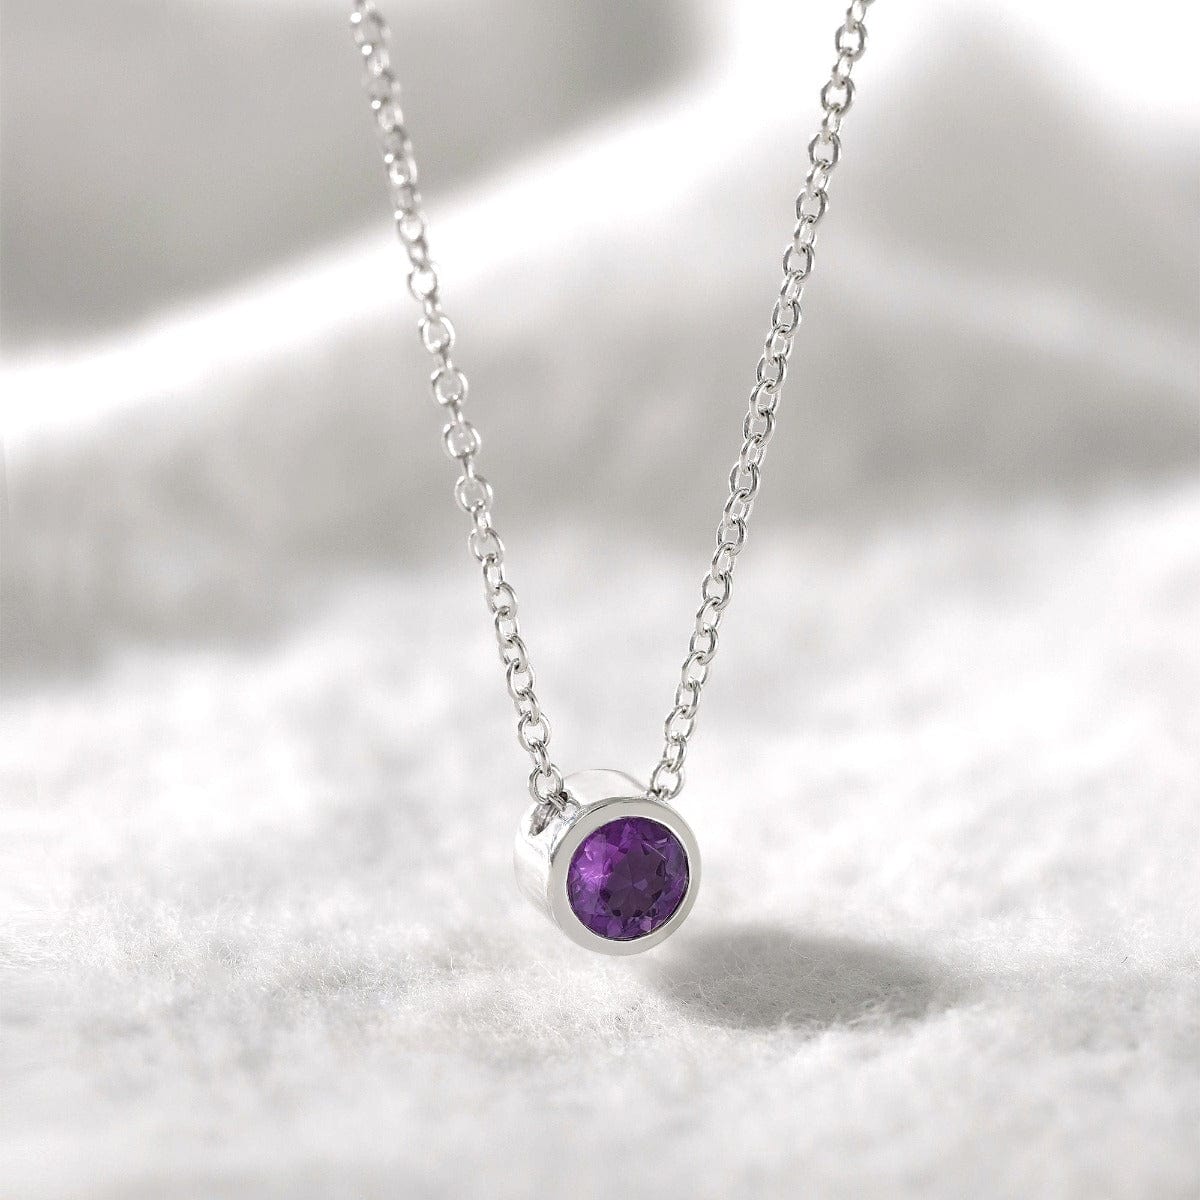 Boma Jewelry Necklaces Amethyst Belle Solo Birthstone Pendant Necklace